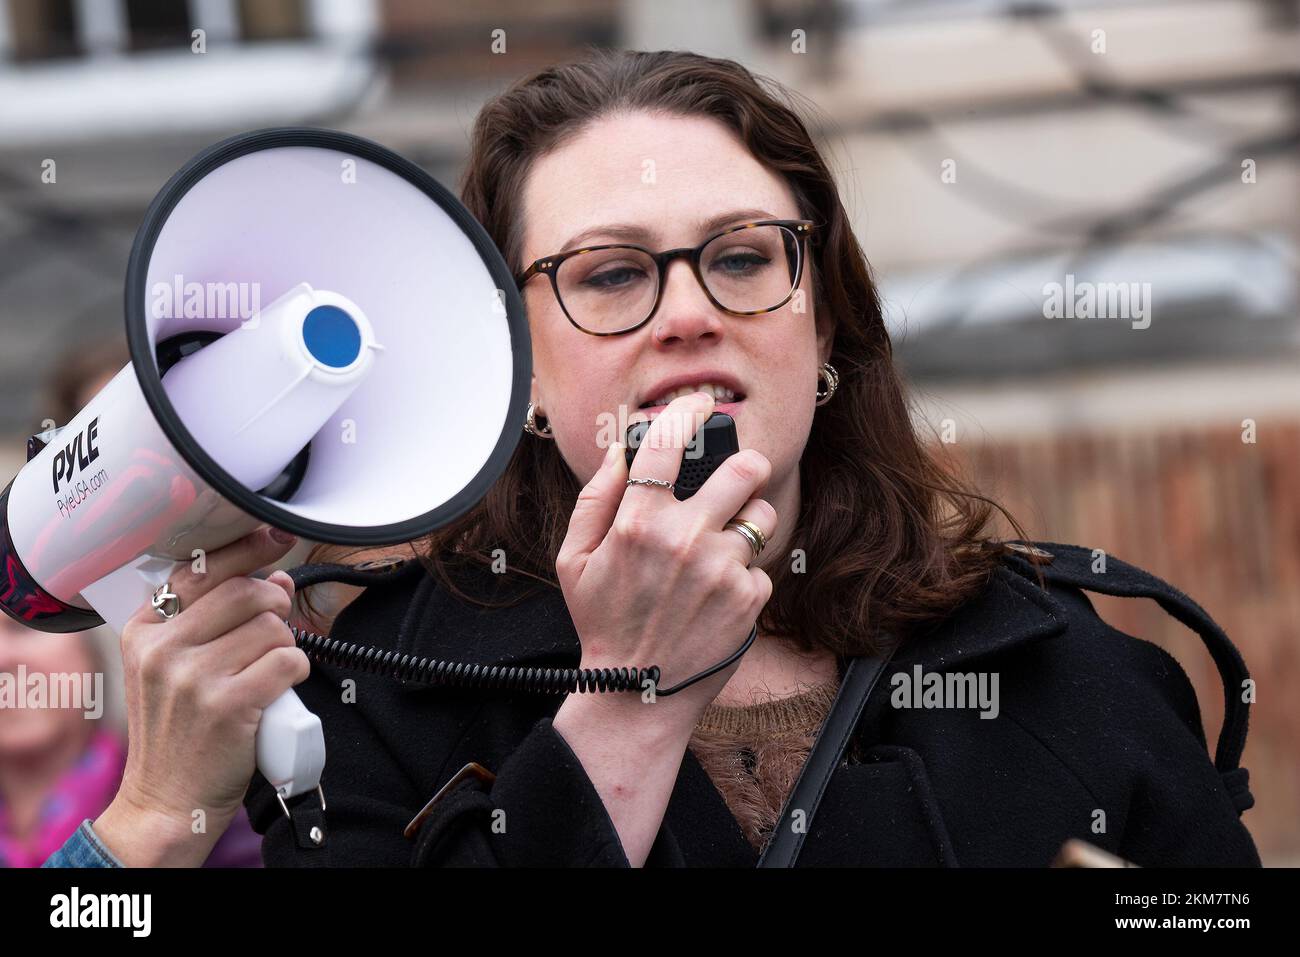 Bristol, UK. 26th November 2022. Trans Pride South West Protest and Bristol City Centre march. Gathering at College Green for speeches then marching through Bristol City centre. Credit: Stephen Bell/Alamy Live News Stock Photo